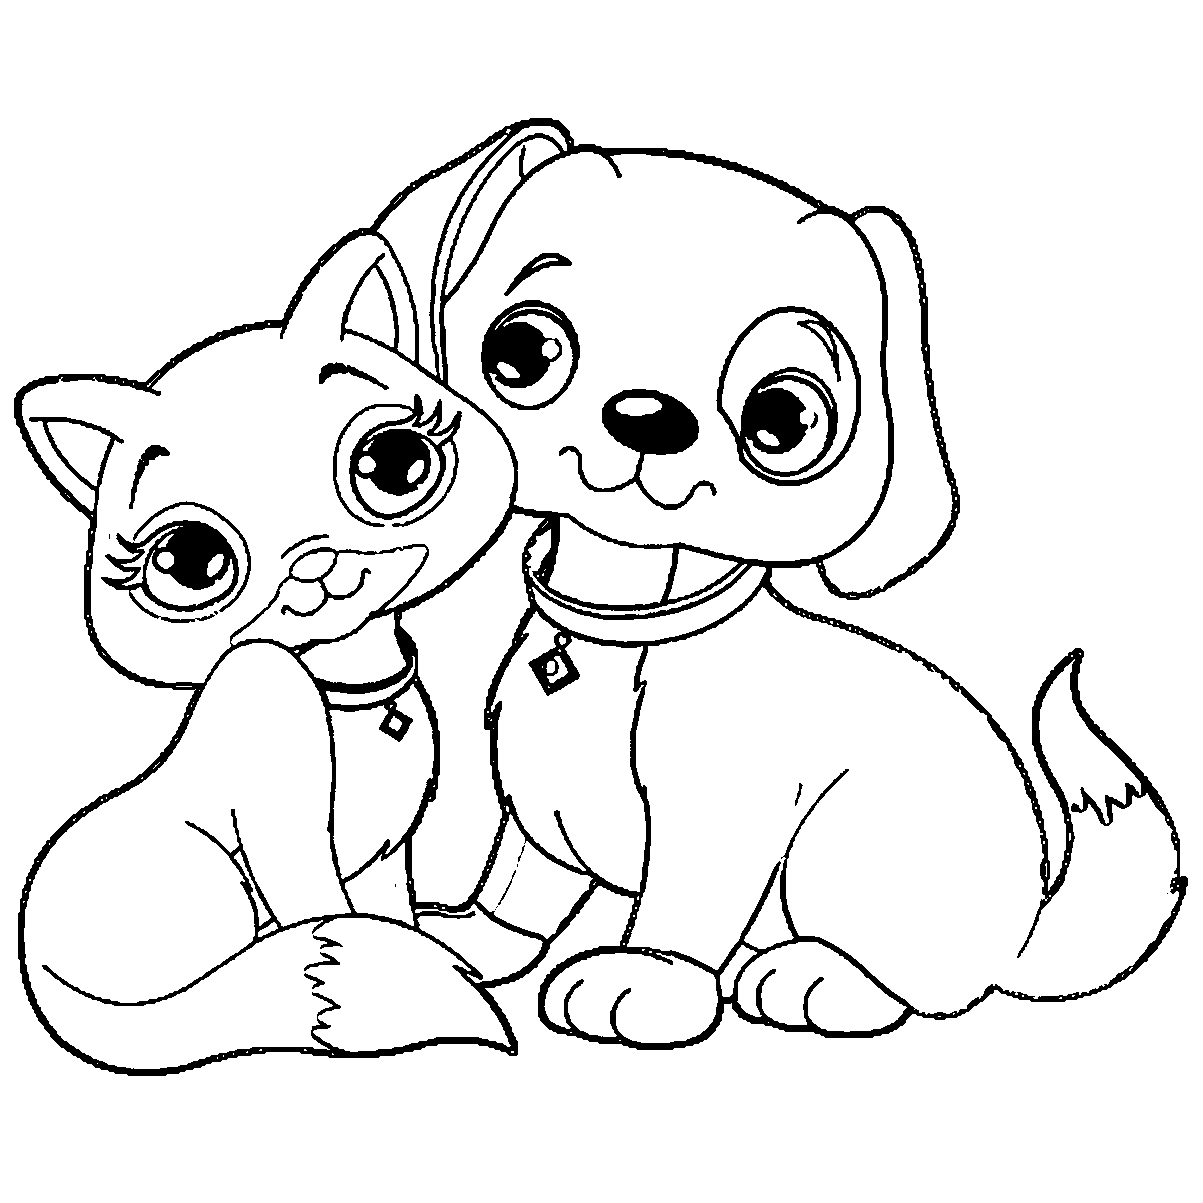 printable coloring pages cats and dogs dog and cat coloring pages getcoloringpagescom pages and printable coloring cats dogs 